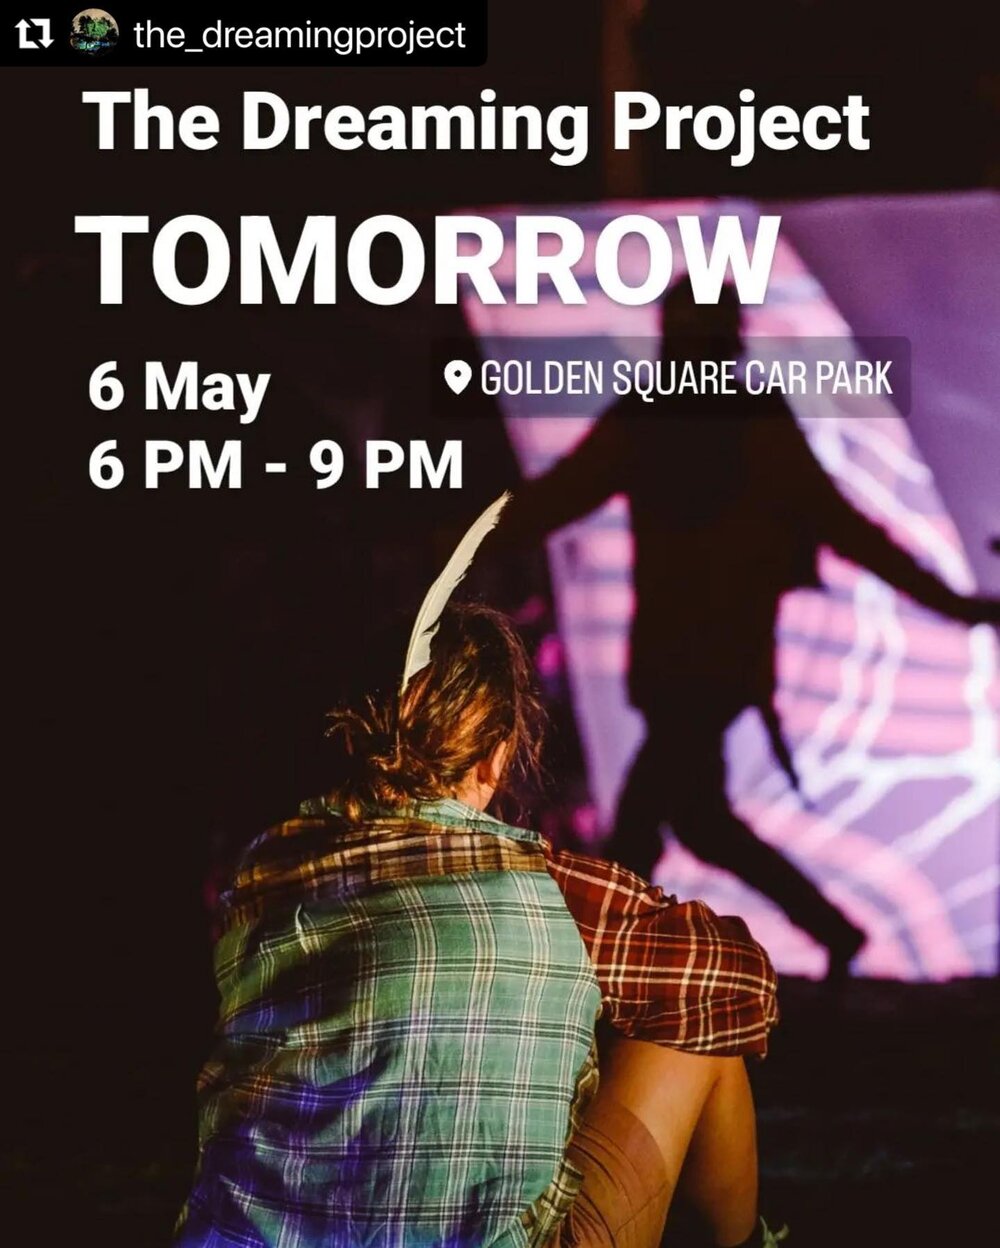 #Repost @the_dreamingproject 
・・・
Tomorrow!!! Don't miss out!

This is an outdoor event, so grab an umbrella and wrap up with something cosy to wear. Free entry, see you mob there ❤️💛🖤✊🏾

@yirramboi 
@littleprojectorcompany 
@koorroyarr
@dylansing